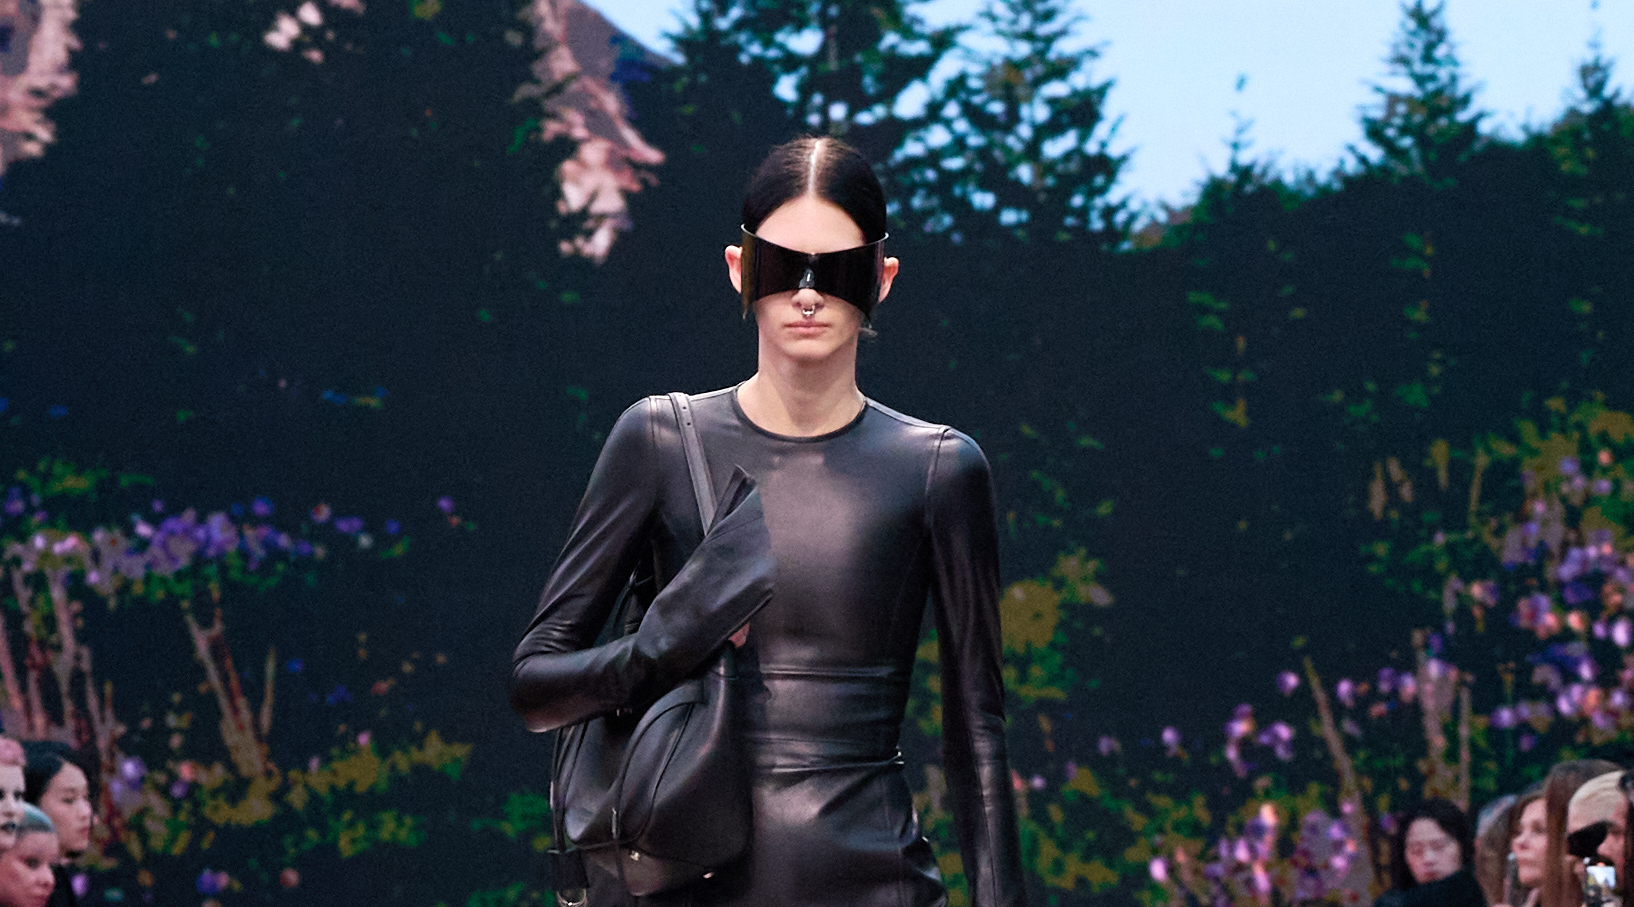 A model is seen walking on the runway clad in an all-black, leather ensemble from the Balenciaga Winter 2024 Ready-to-Wear collection. She is wearing a form-fitting, full-sleeved leather top and carries a coordinating black leather bag. Oversized, sleek sunglasses cover her eyes, adding an edge to the monochromatic outfit.